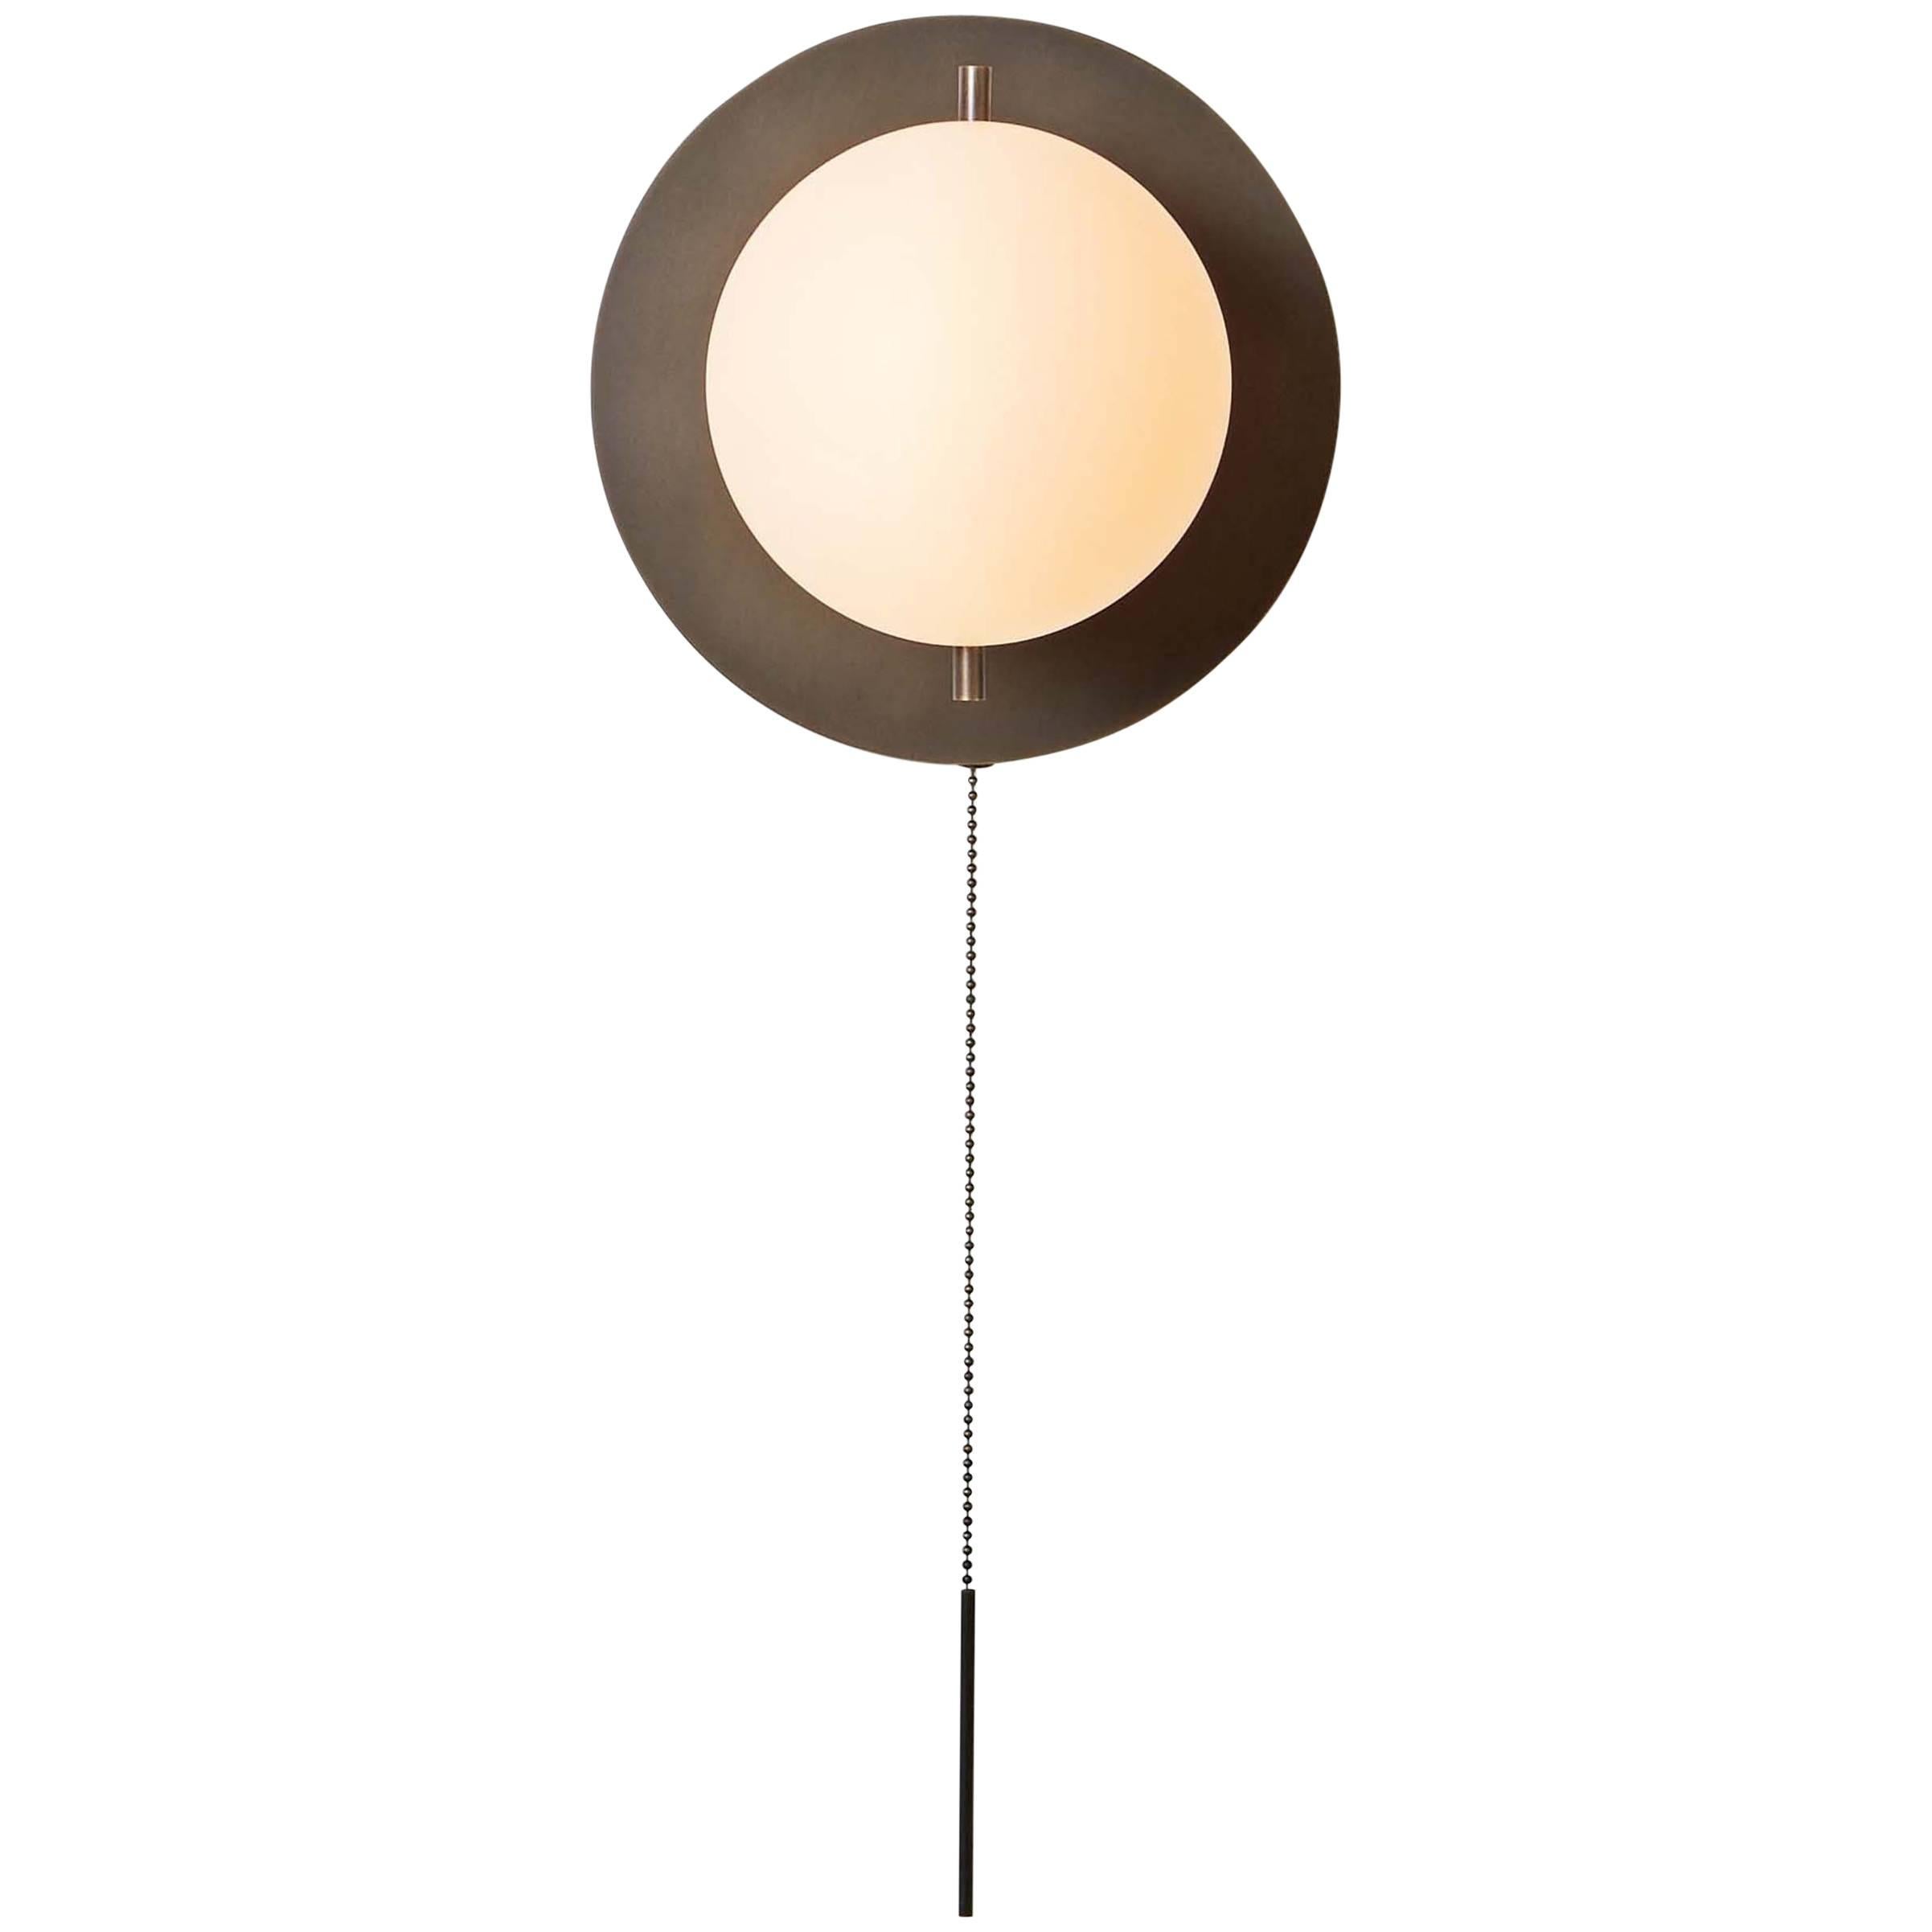 Workstead Signal Sconce in Bronze, with Blown Glass Globe and Bronze Pull Chain For Sale